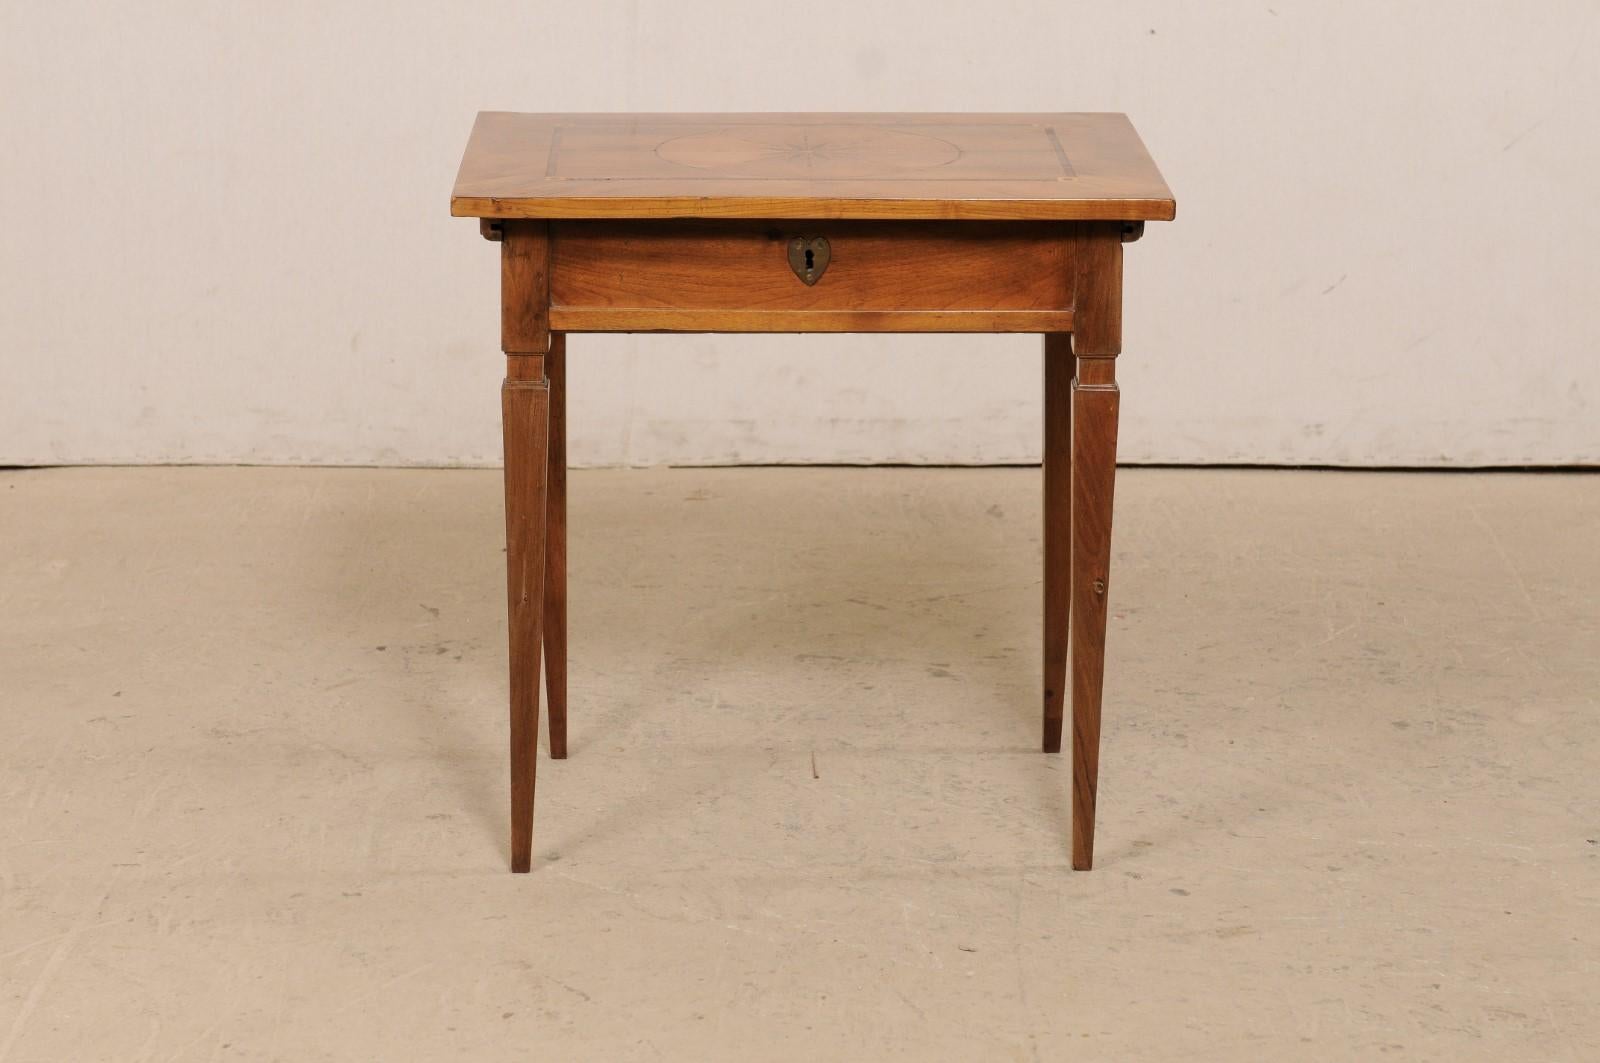 19th C. Italian Writing Desk w/Decorative Inlay & Sliding Top for Hidden Storage For Sale 5